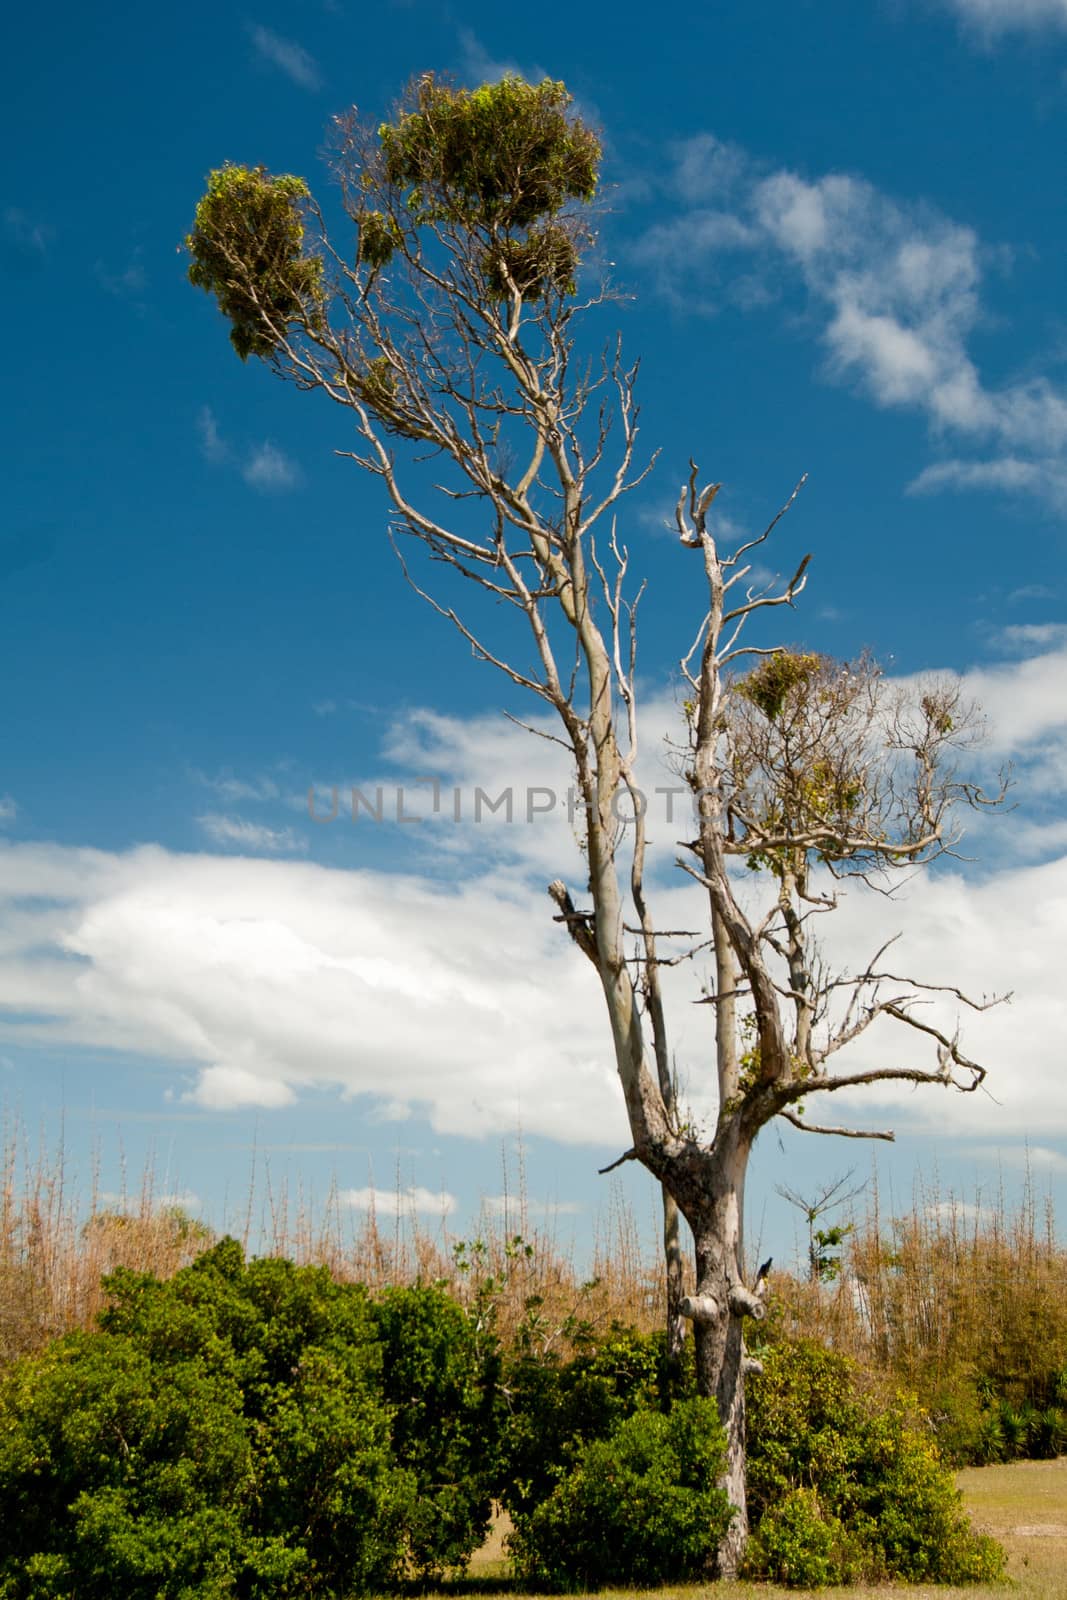 Lonely tree in landscape shrubs and blue sky with clouds.